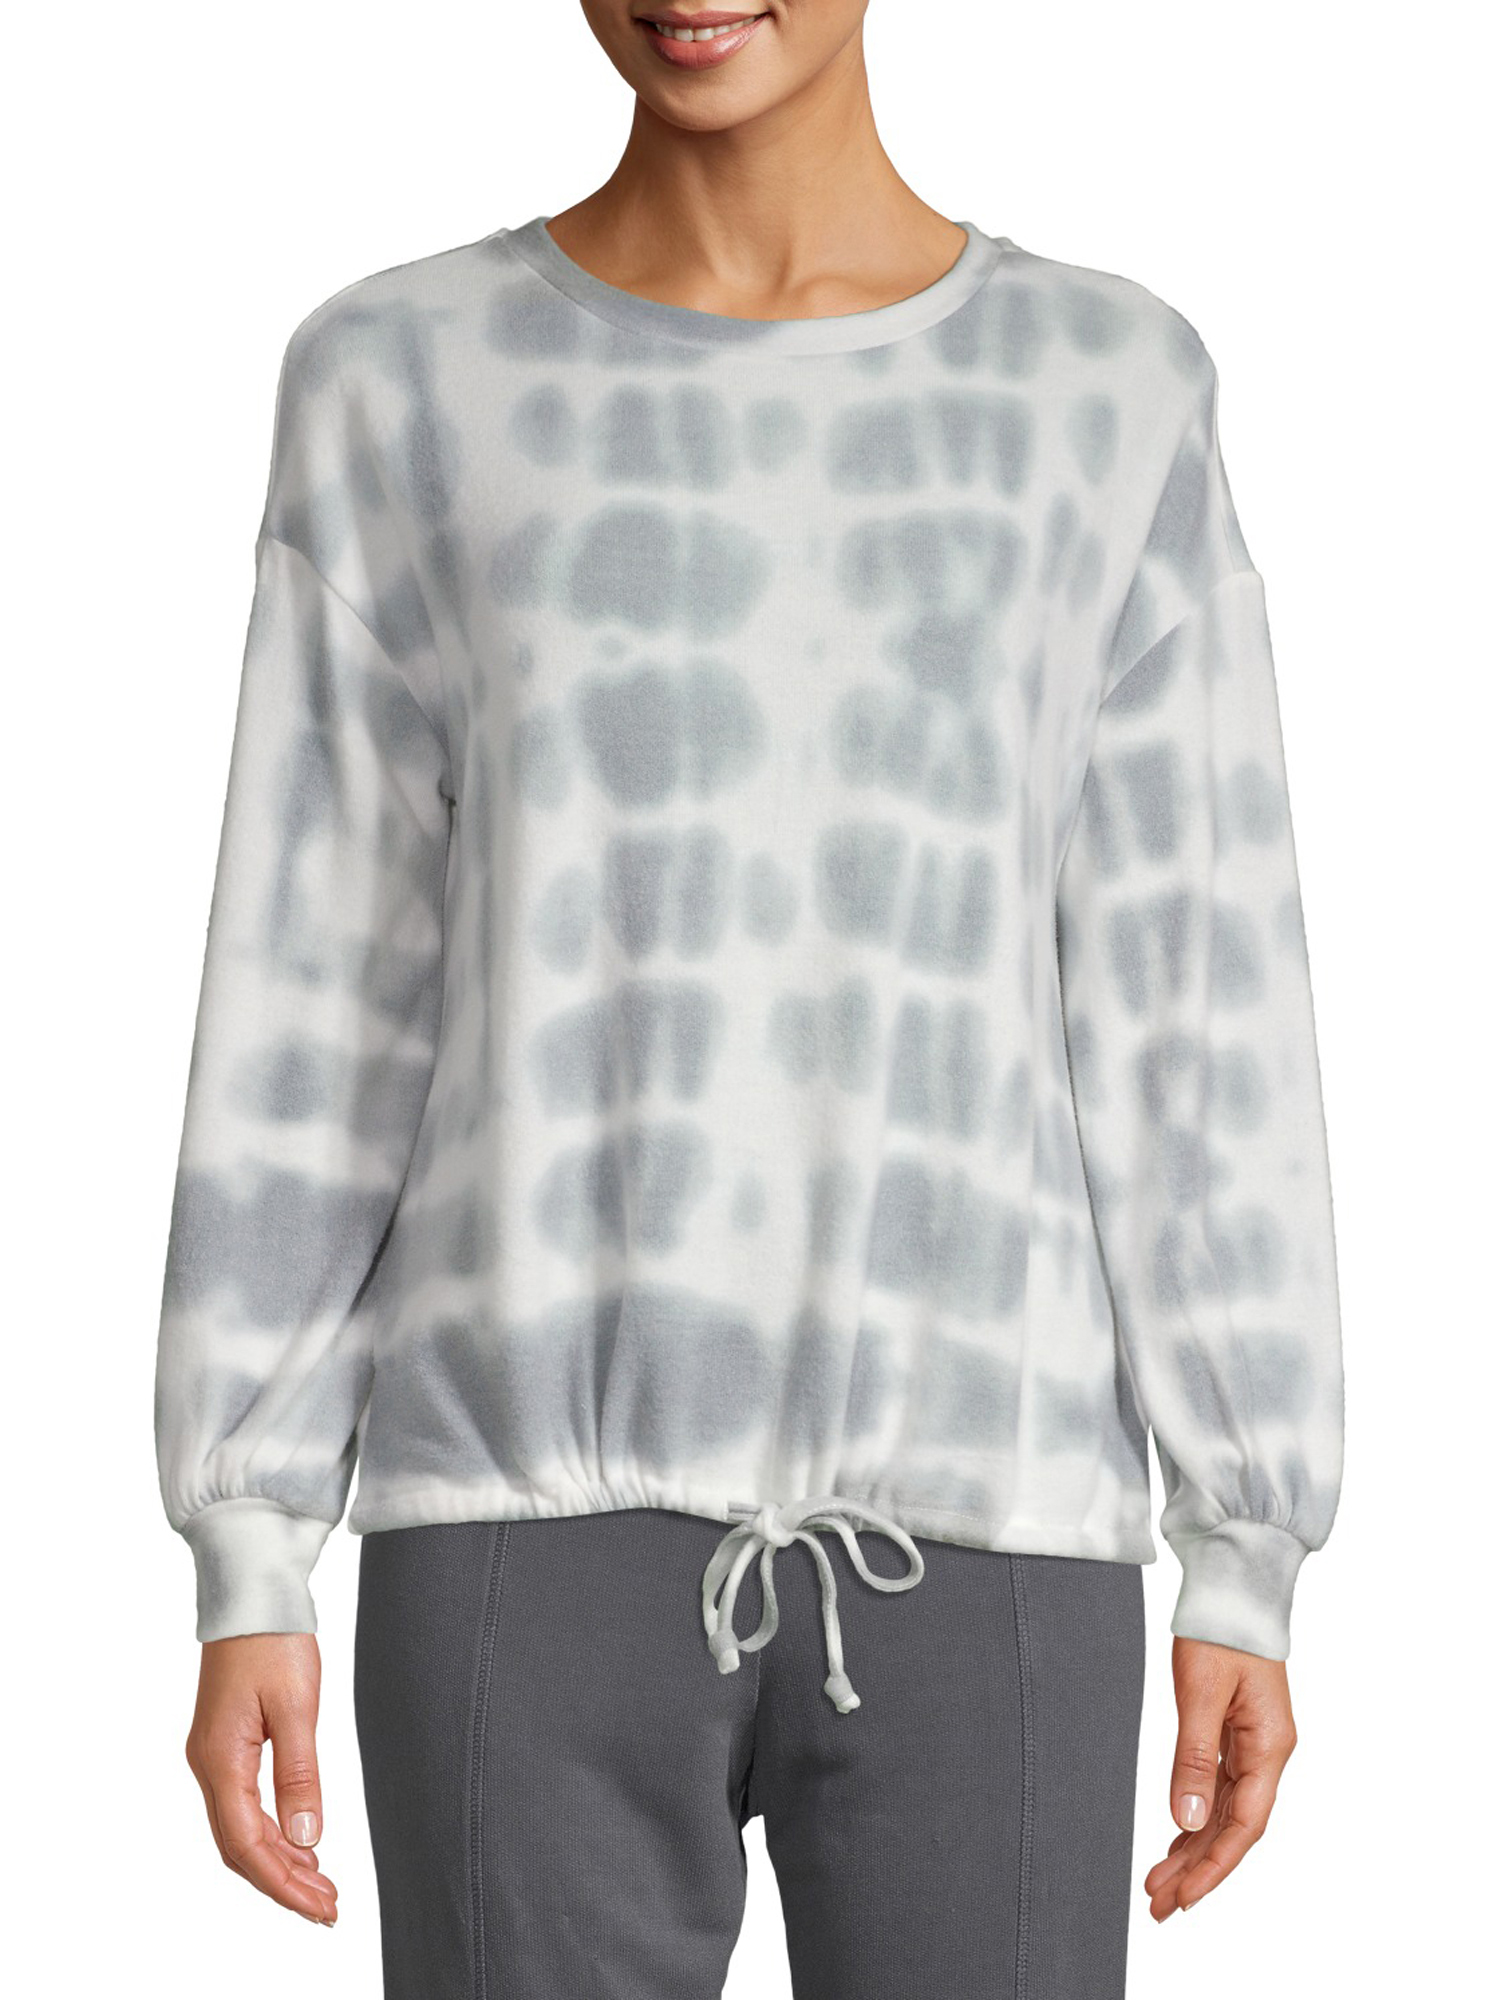 Como Blu Women's Athleisure Hacci Tie Dye Pullover with Drawstring - image 1 of 6